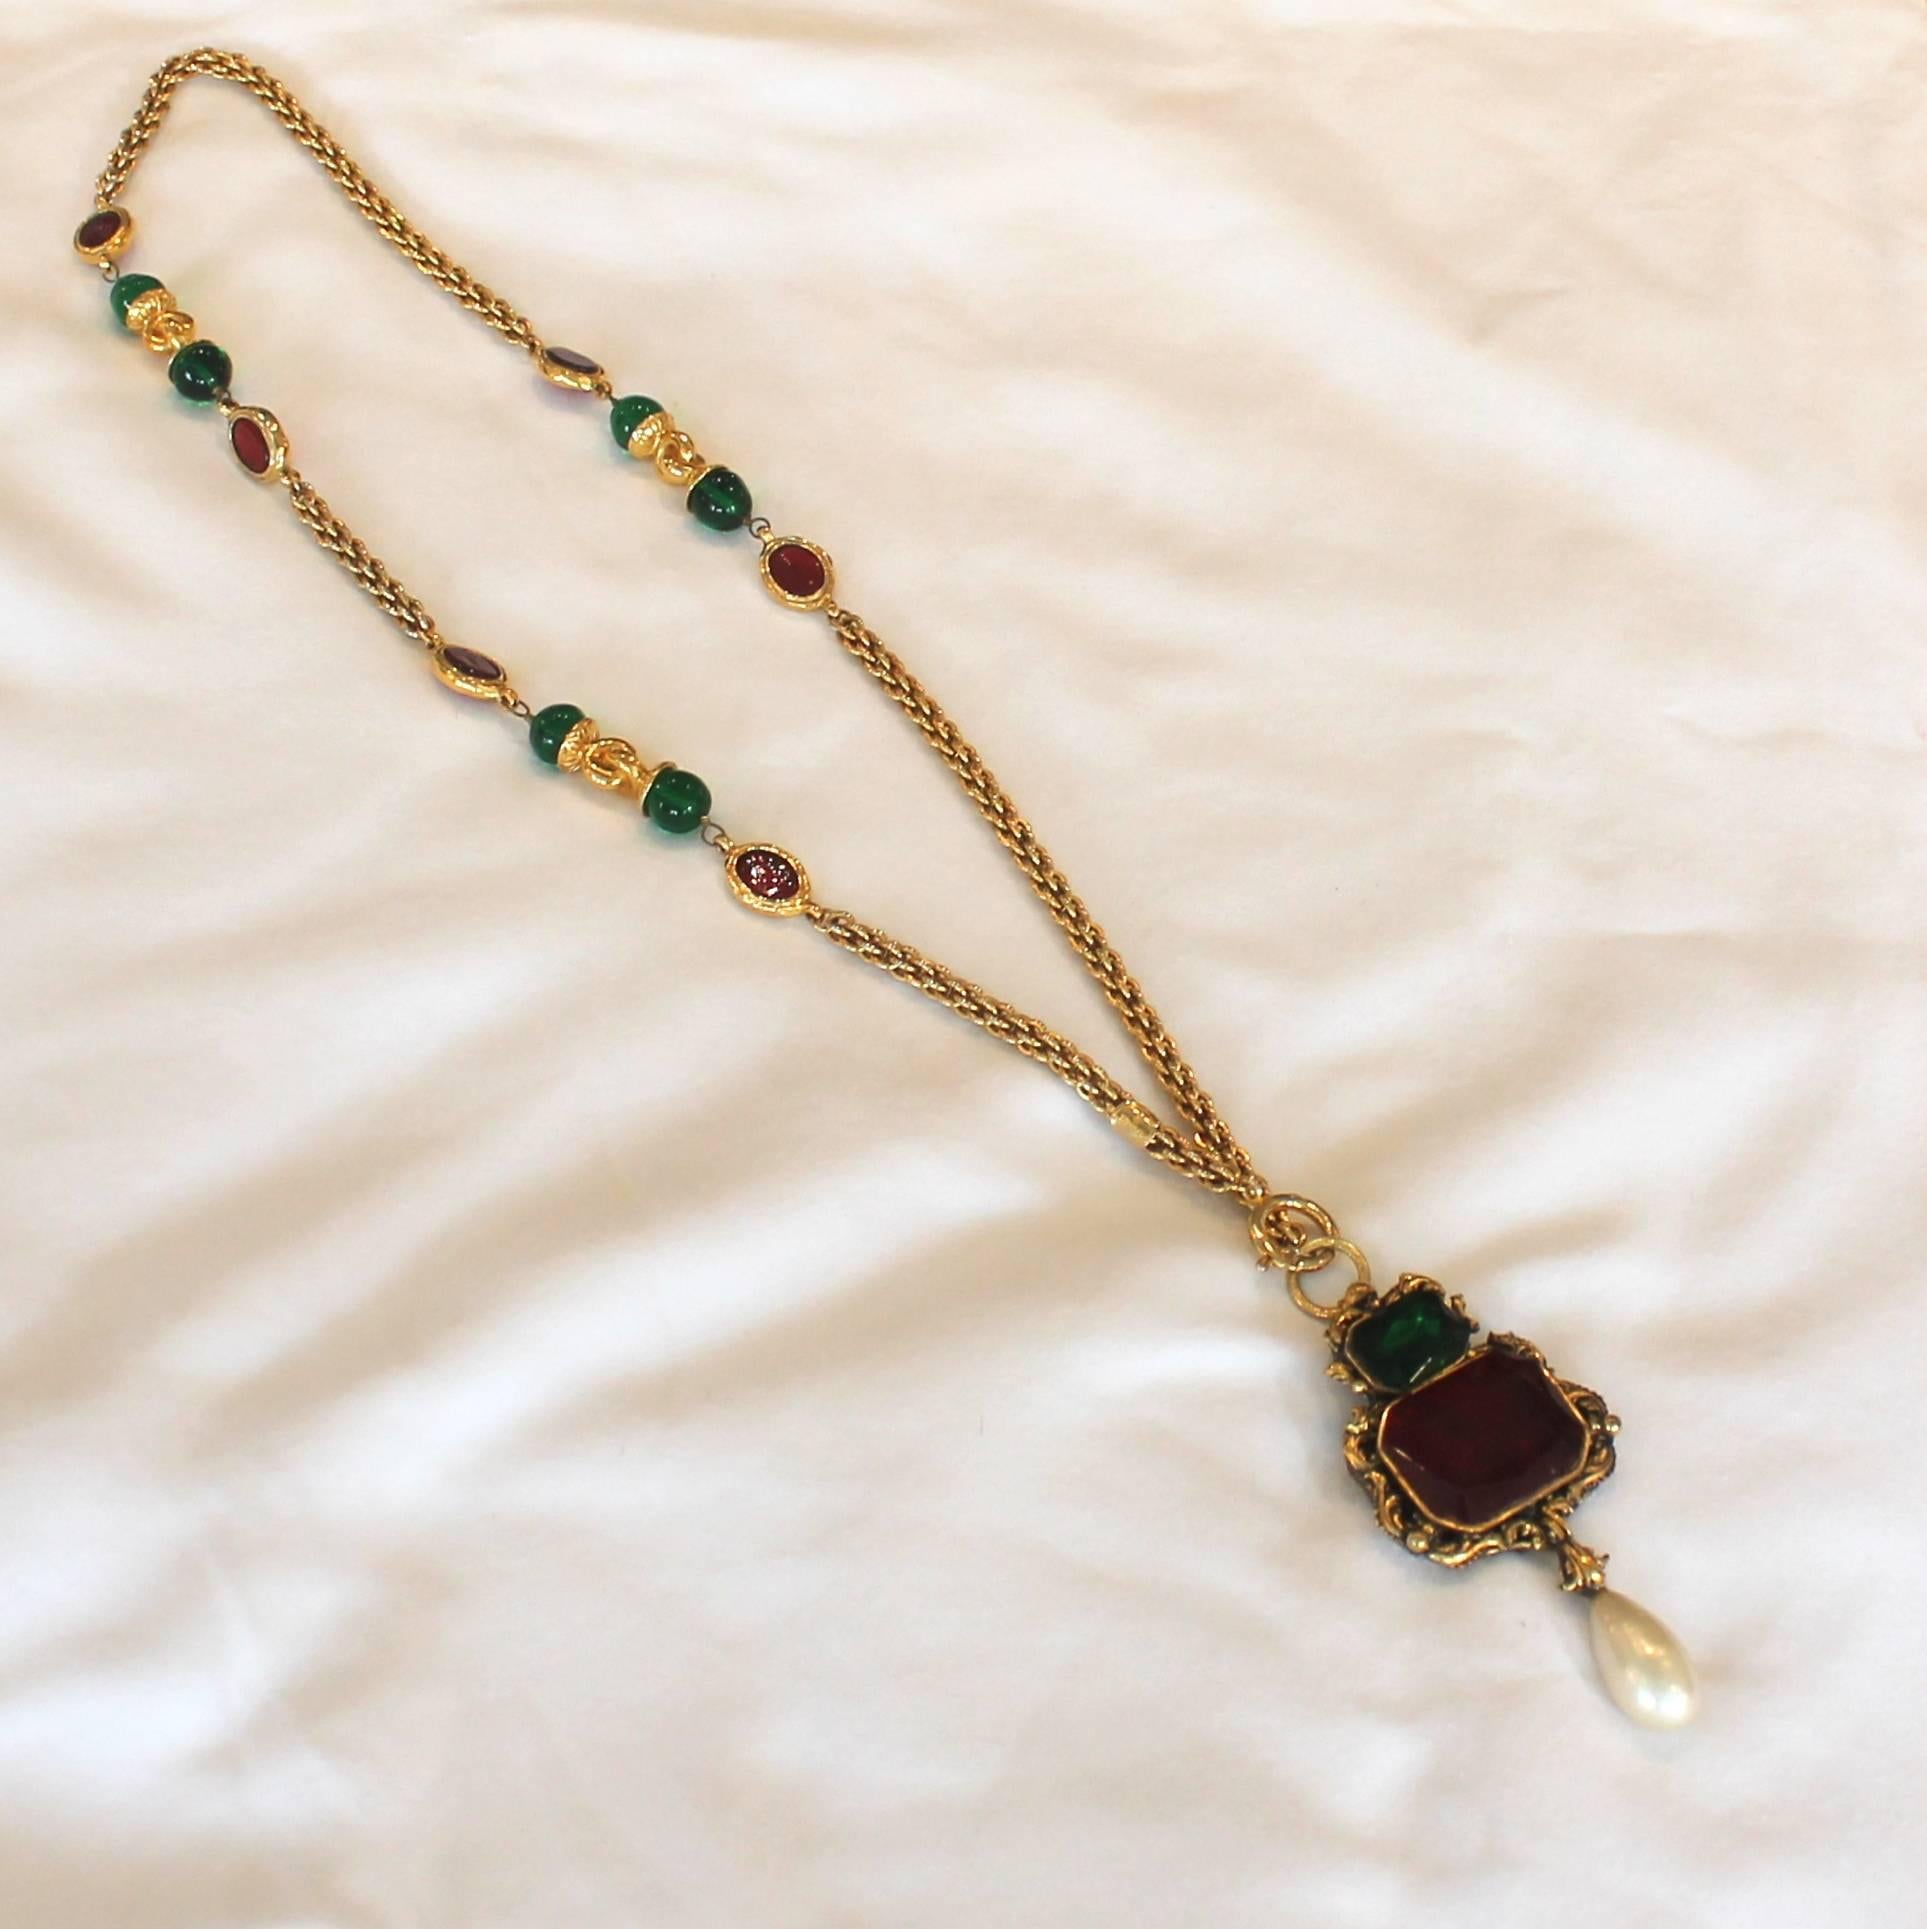 Women's Chanel Gold and Red and Green Gripoix Necklace - circa 1970s